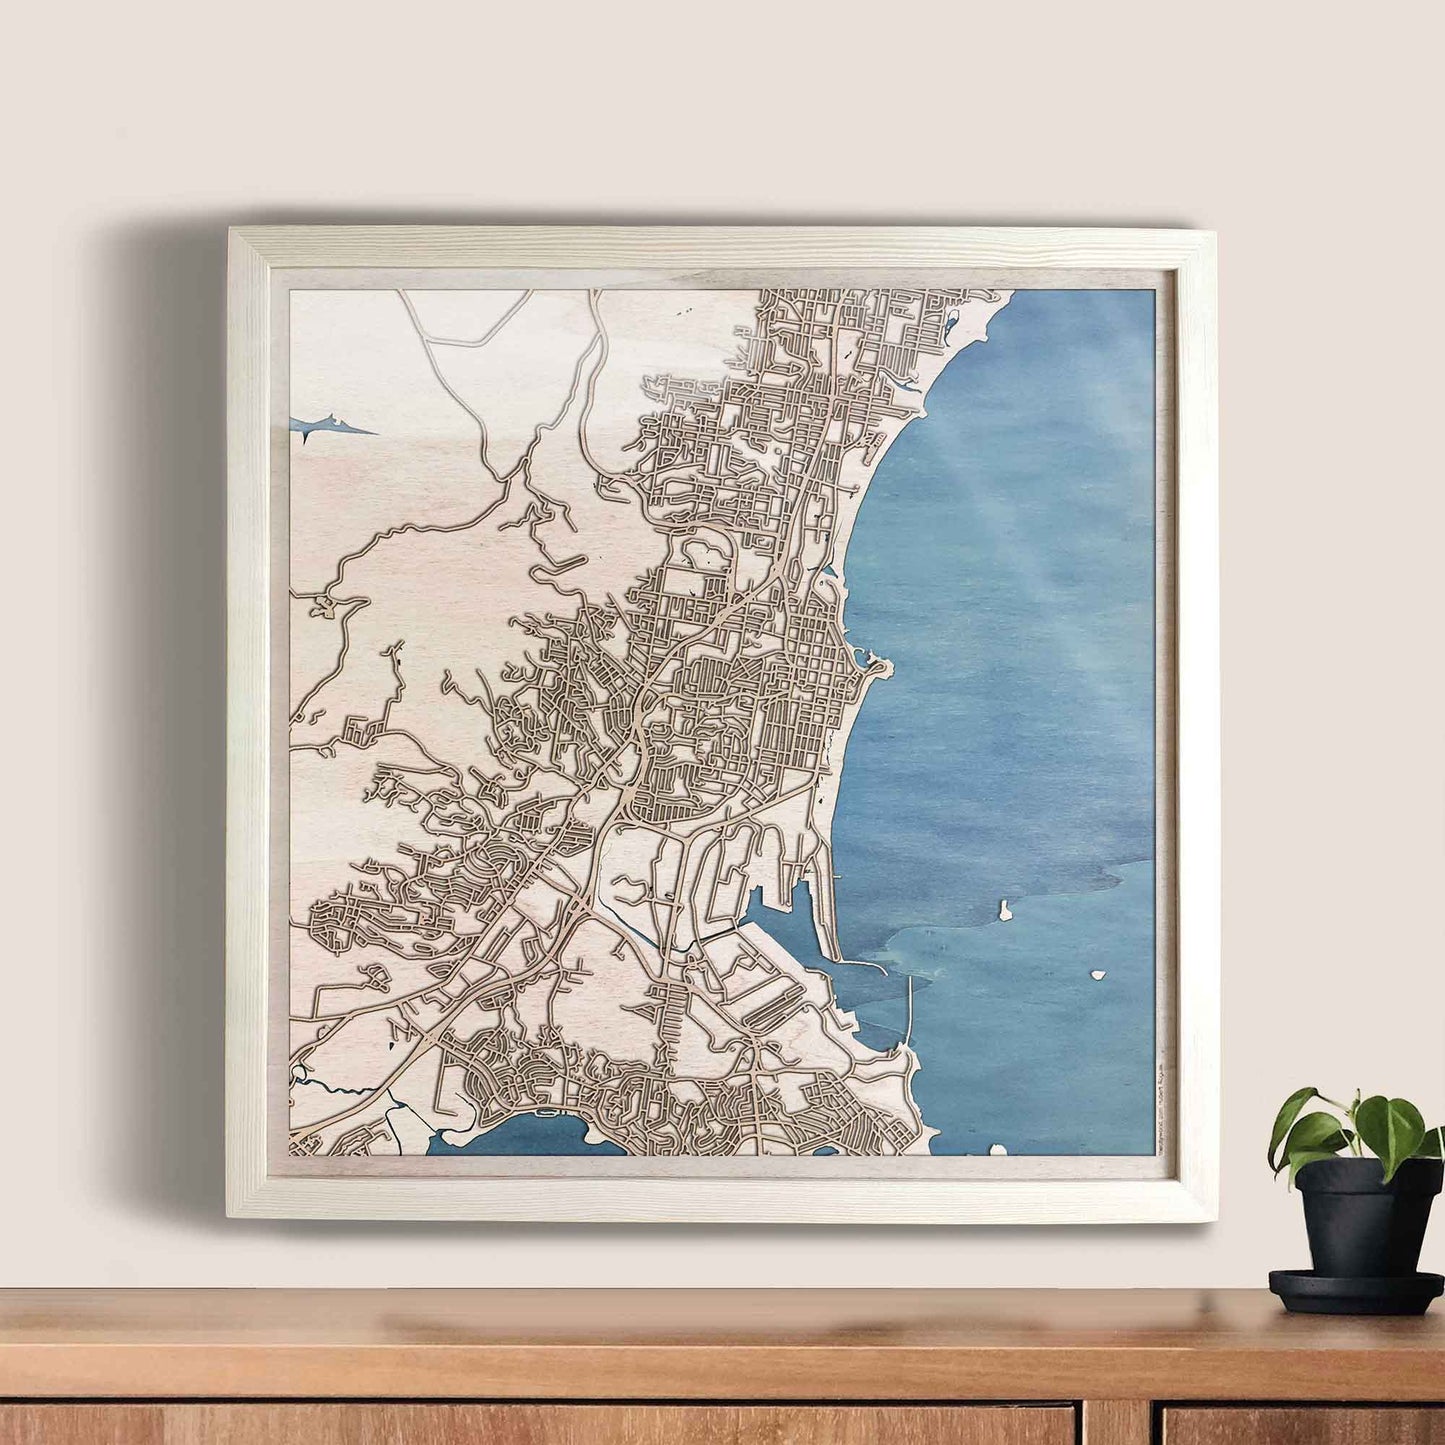 Wollongong Wooden Map by CityWood - Custom Wood Map Art - Unique Laser Cut Engraved - Anniversary Gift